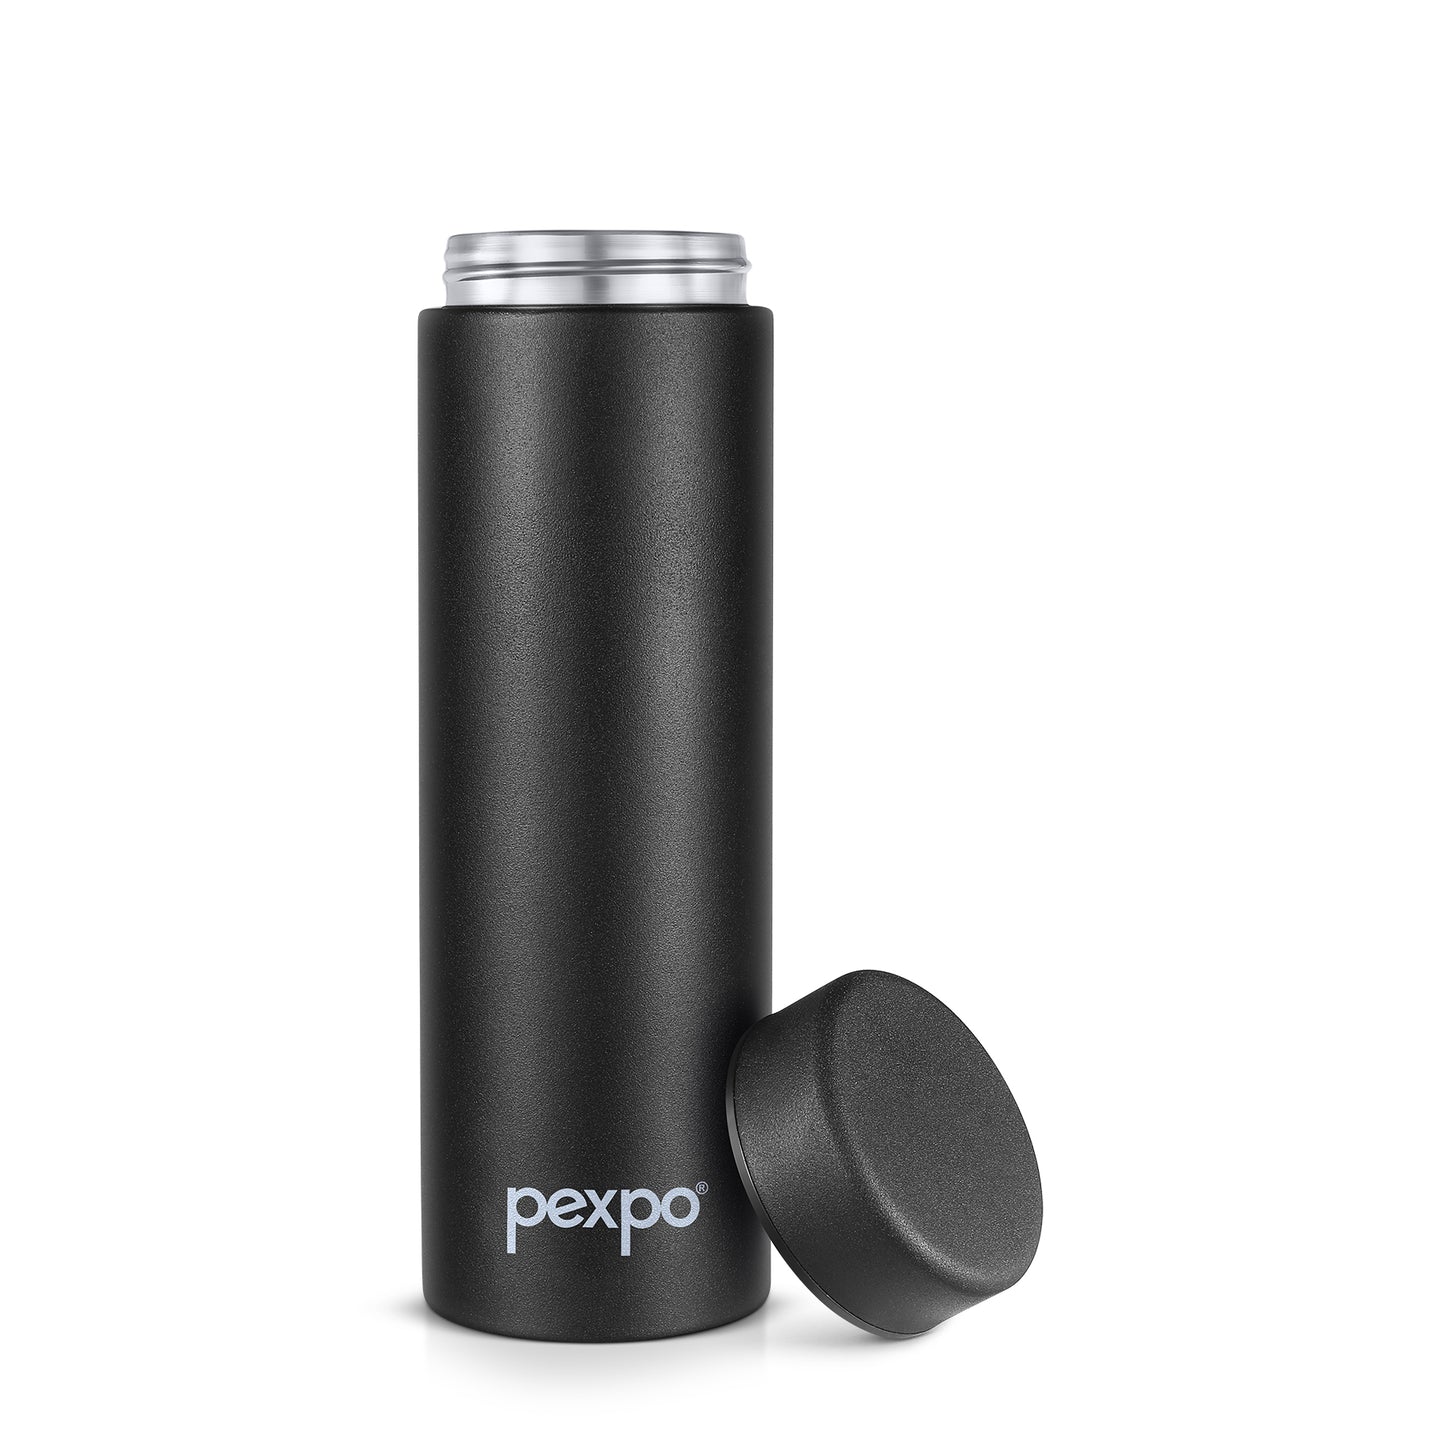 Pexpo Titanium- Stainless Steel Hot and Cold Vacuum Insulated Flask |  BPA Free & Keeps Drinks Hot/Cold for 24+ Hours